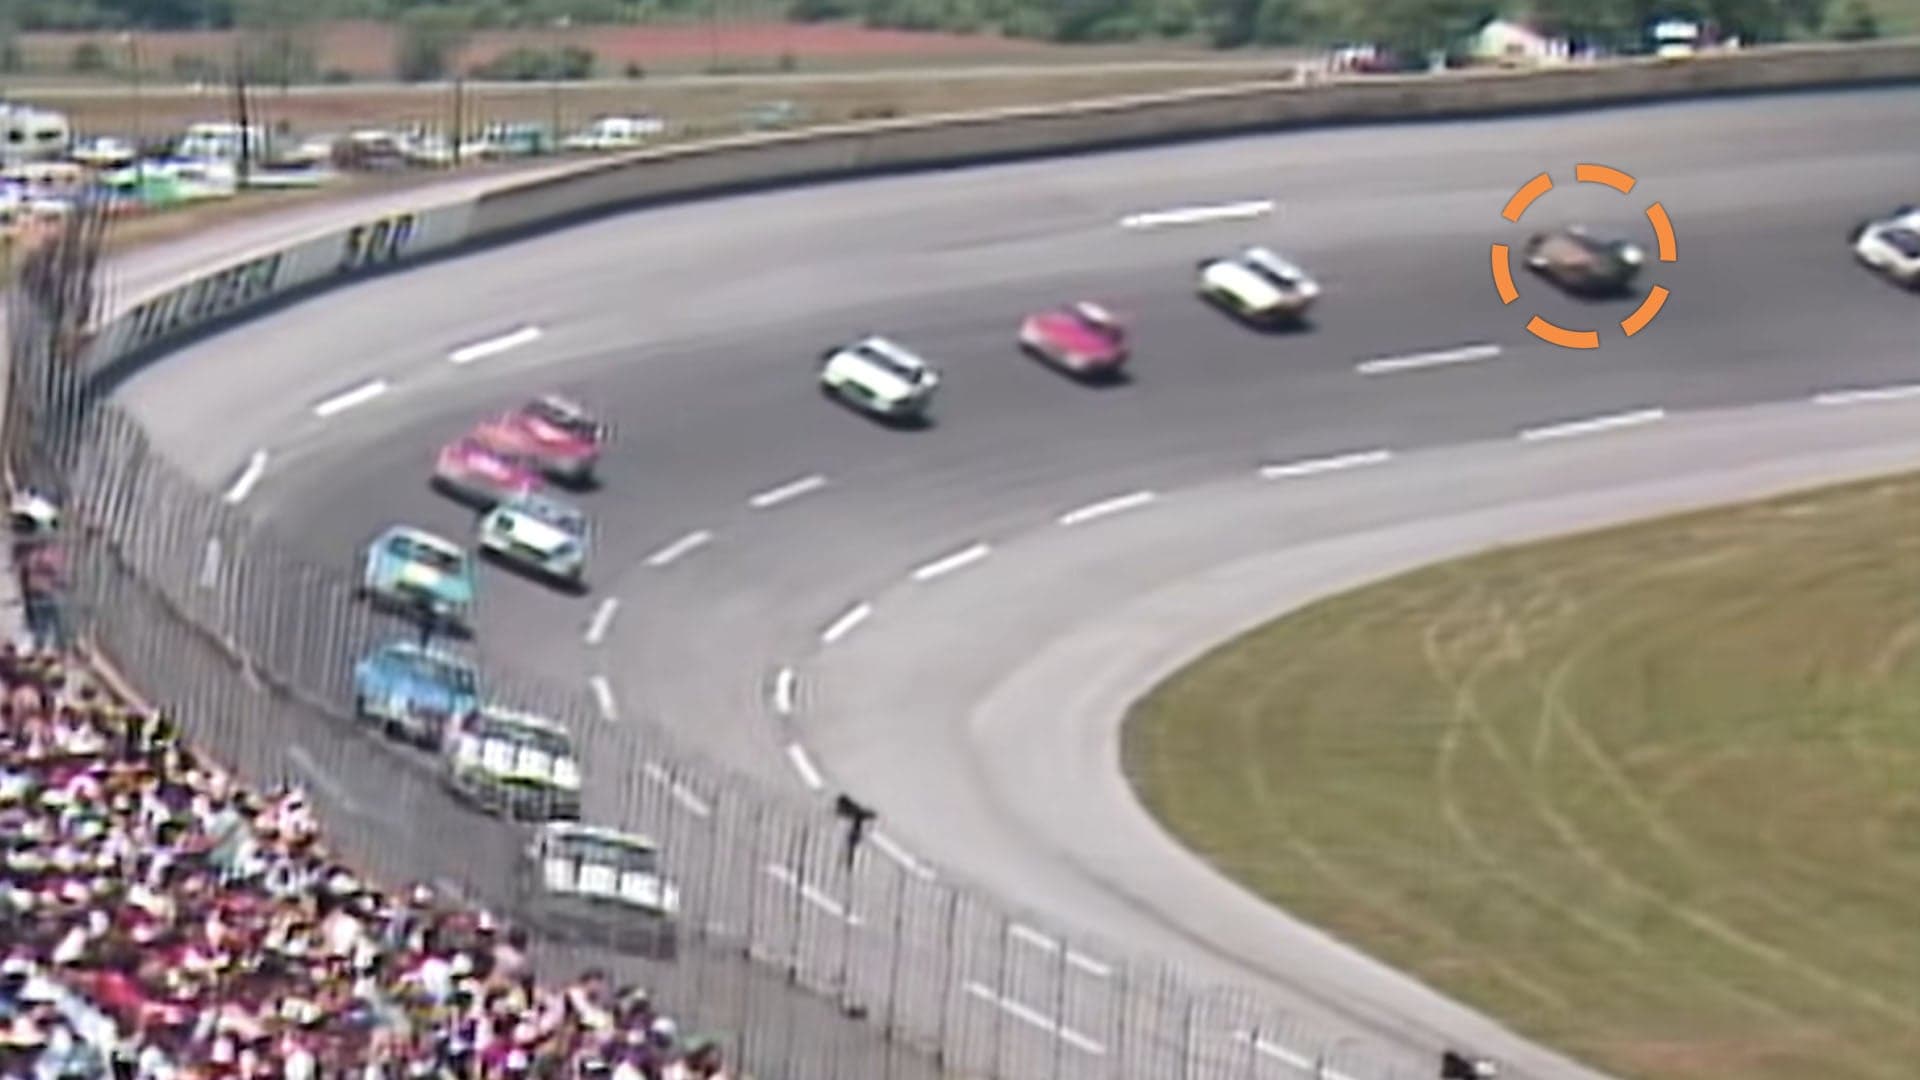 This Mystery Driver Weaseled His Way Into a NASCAR Race. 40 Years Later, the Case Is Unsolved